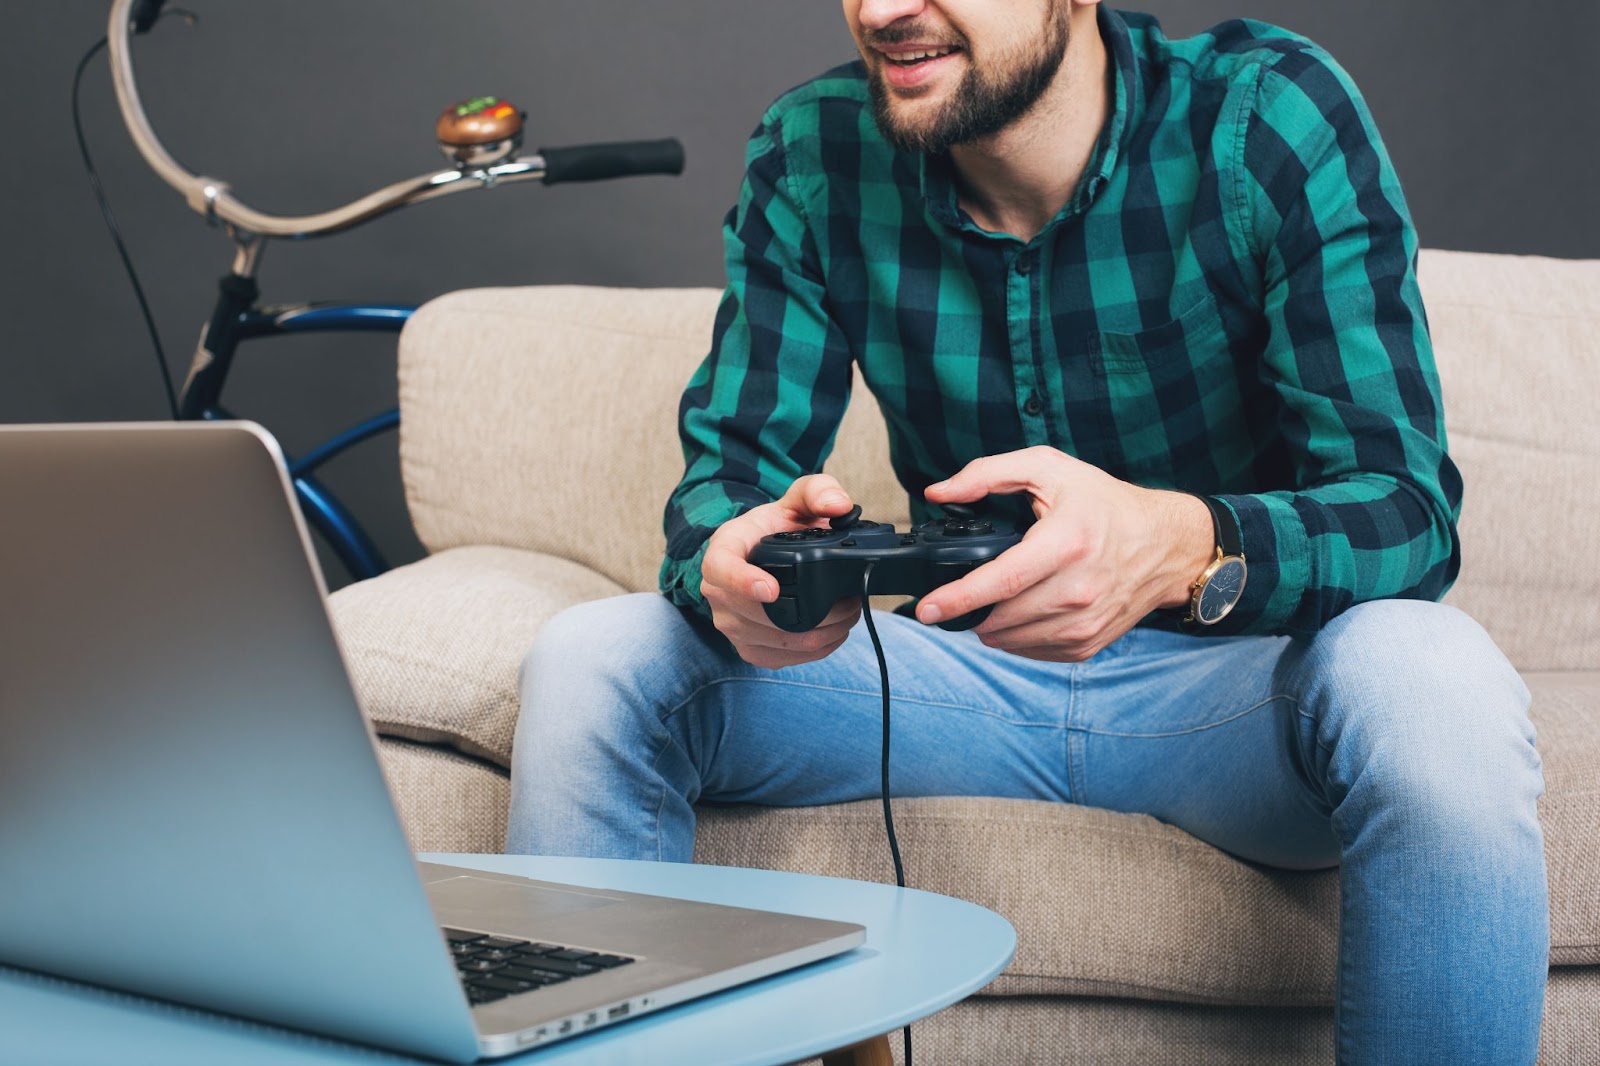 Man sitting on couch playing video game